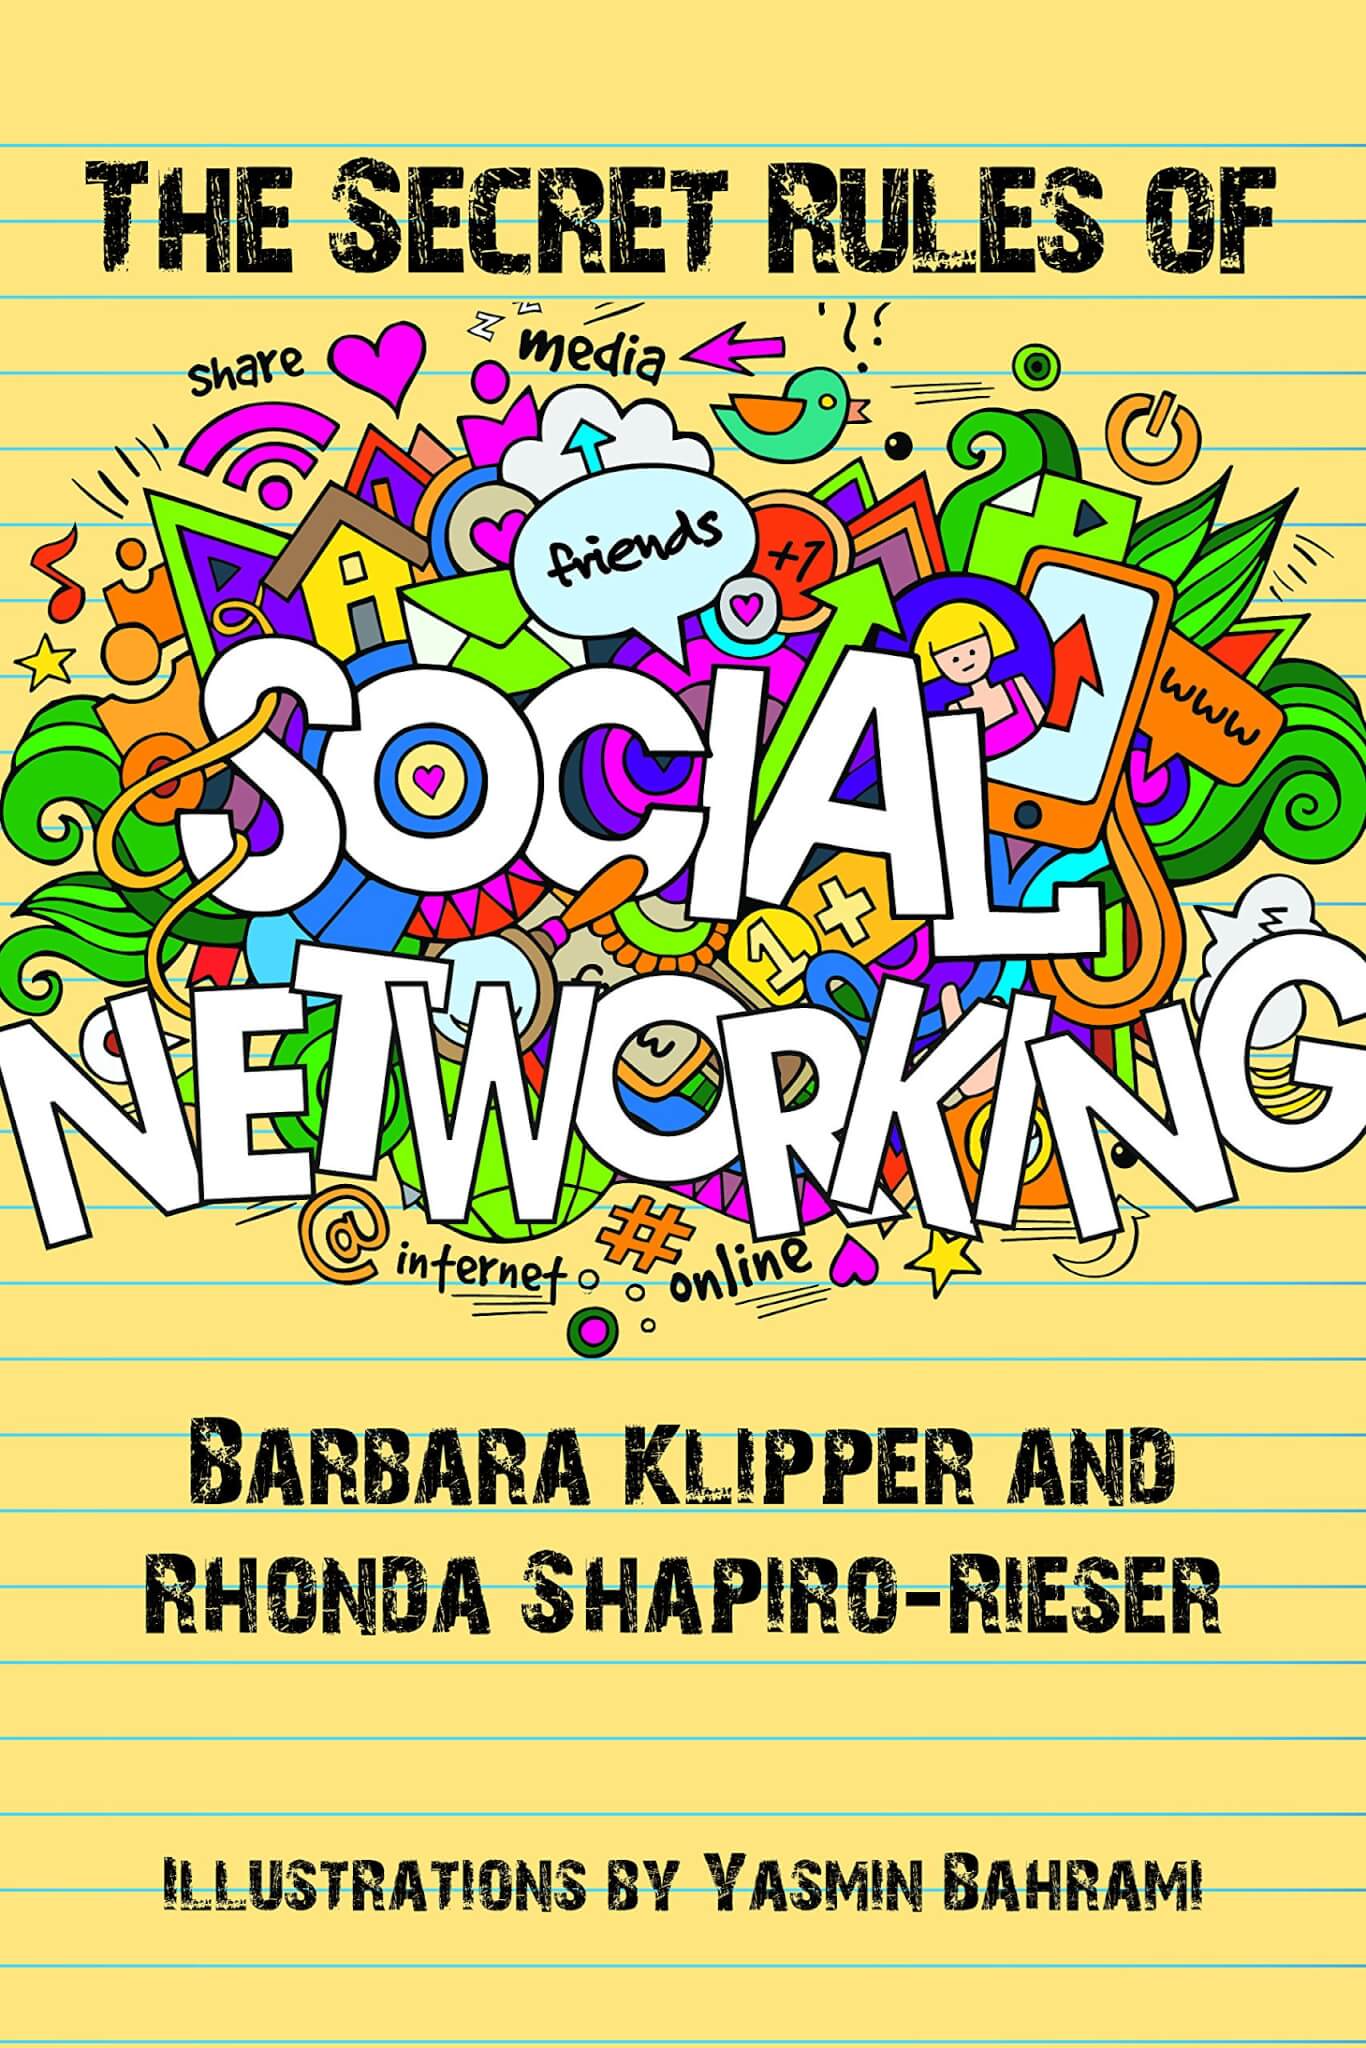 The Secret Rules of Social Networking